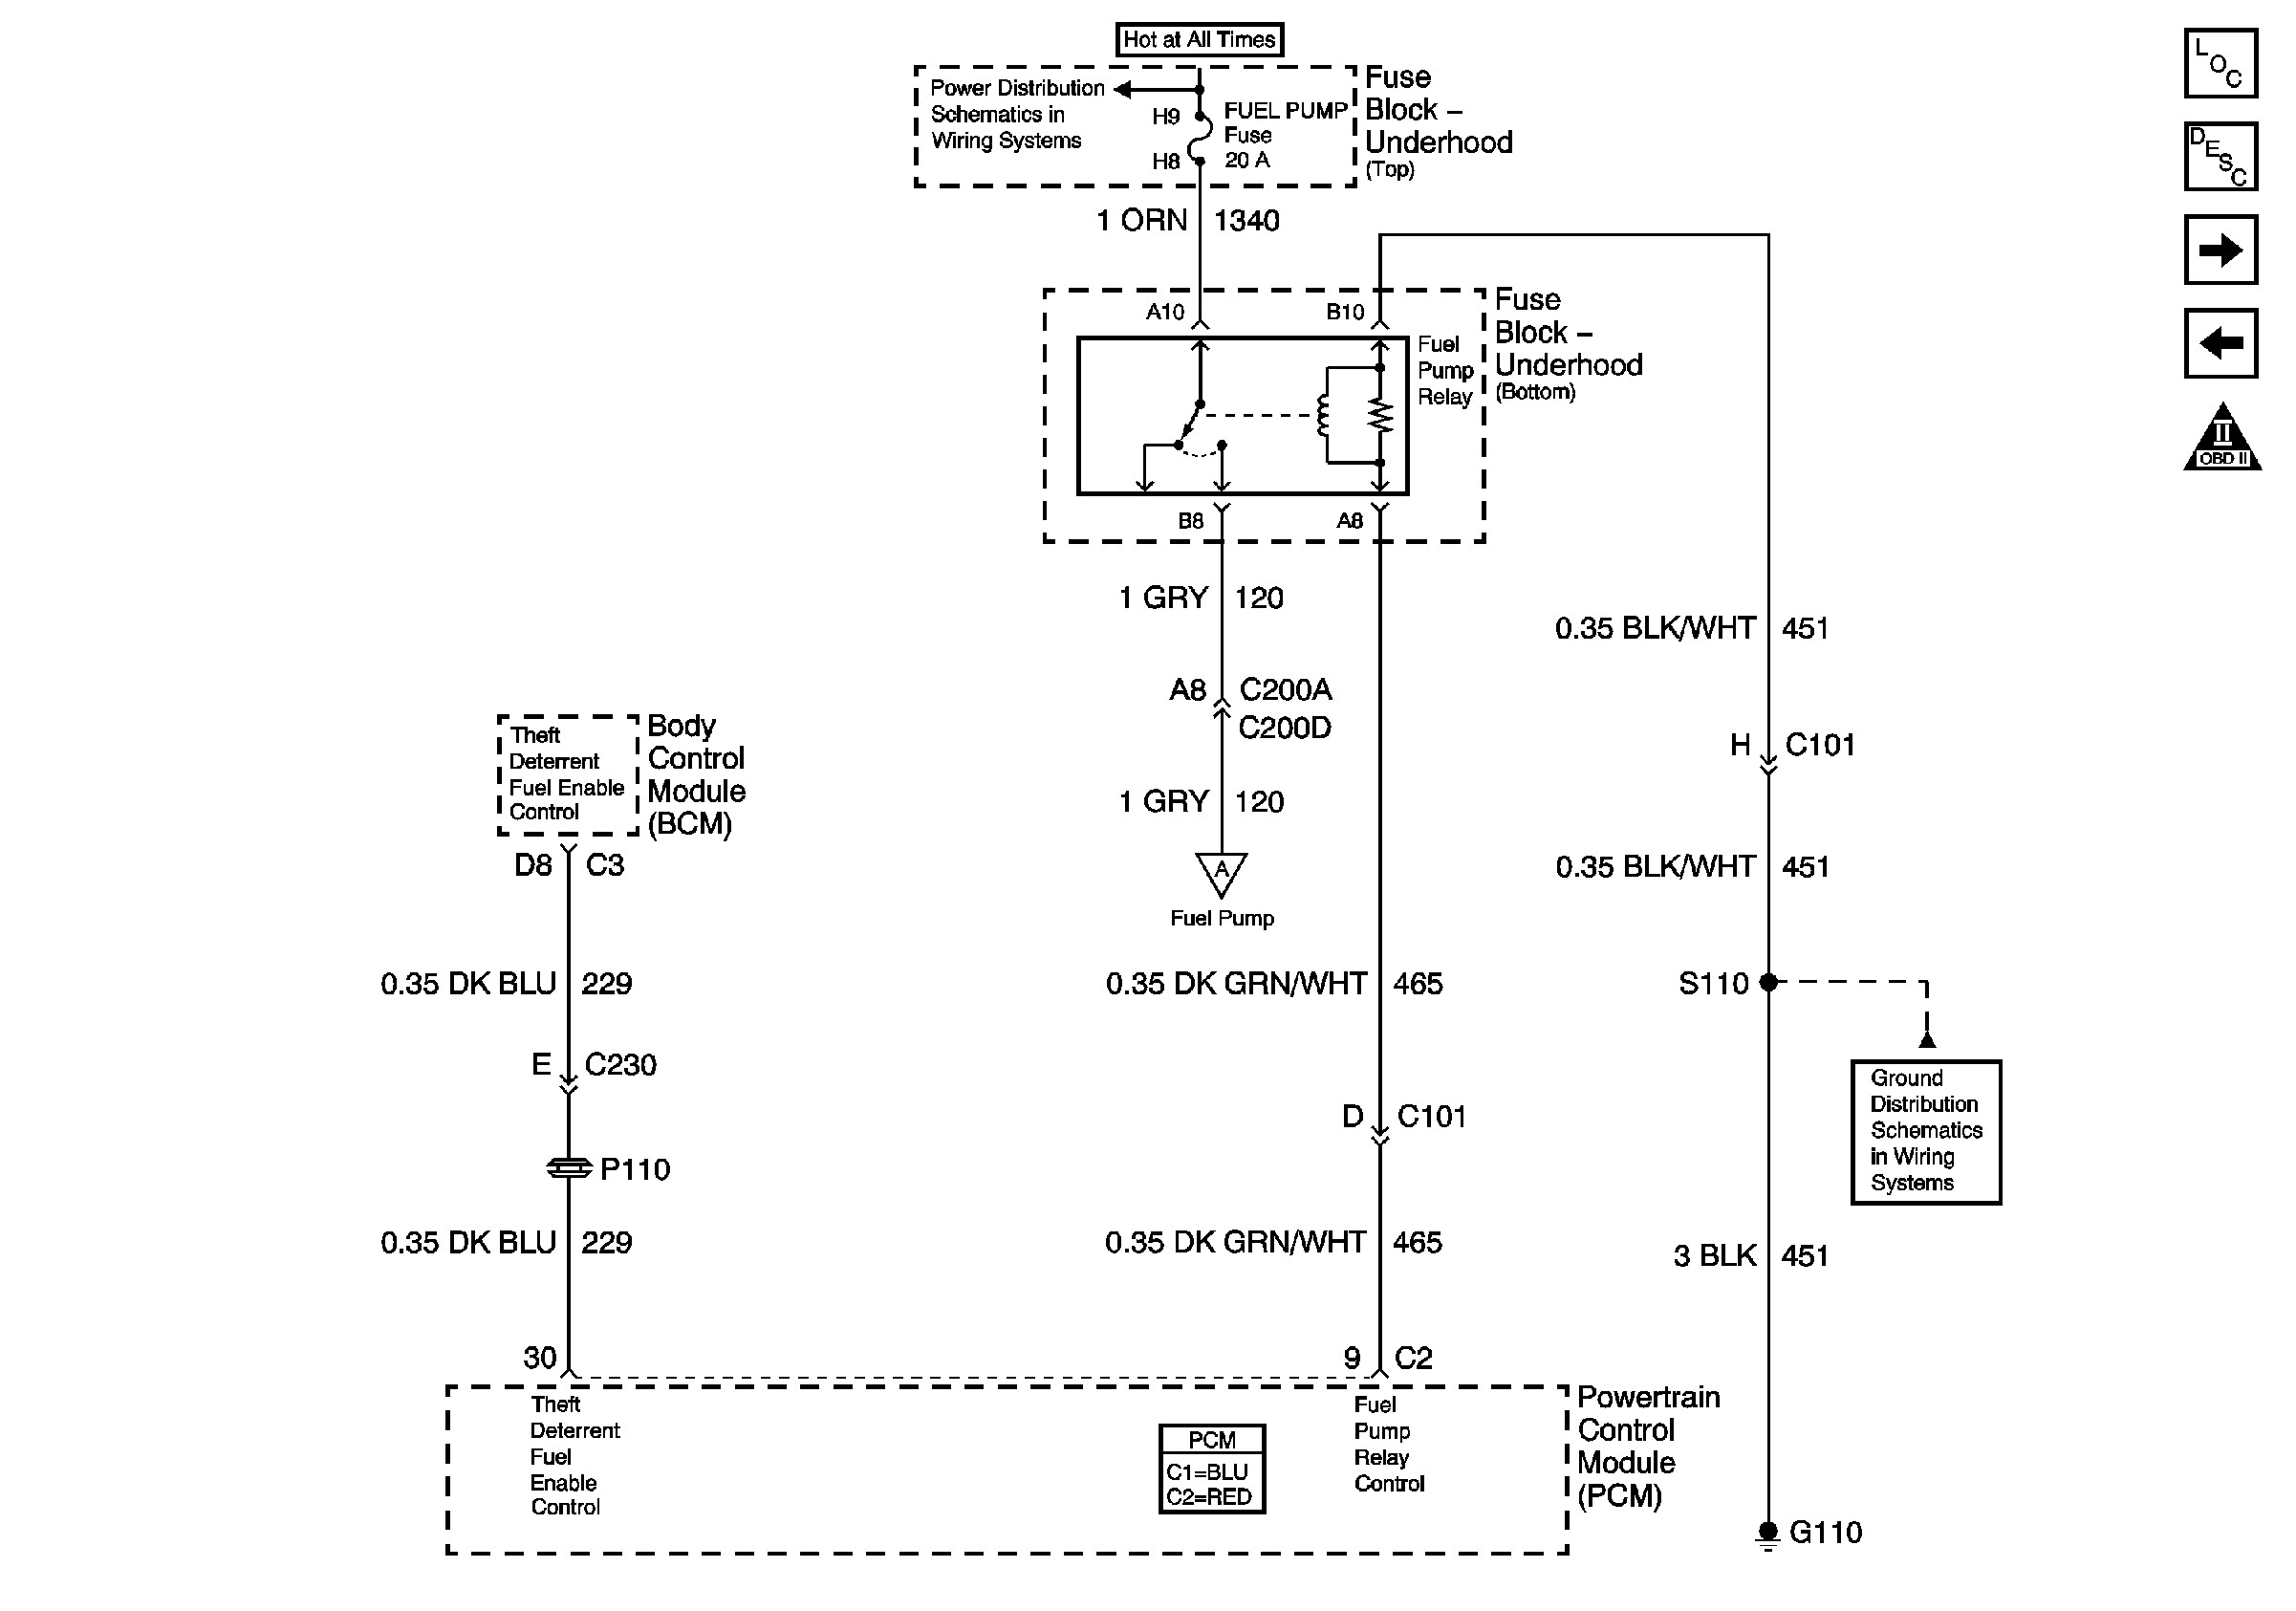 Wiring Diagram for An Electric Fuel Pump and Relay 98 Ls1 to 94 Miata Selected Details Of My Swap Custom Wiring Of Wiring Diagram for An Electric Fuel Pump and Relay